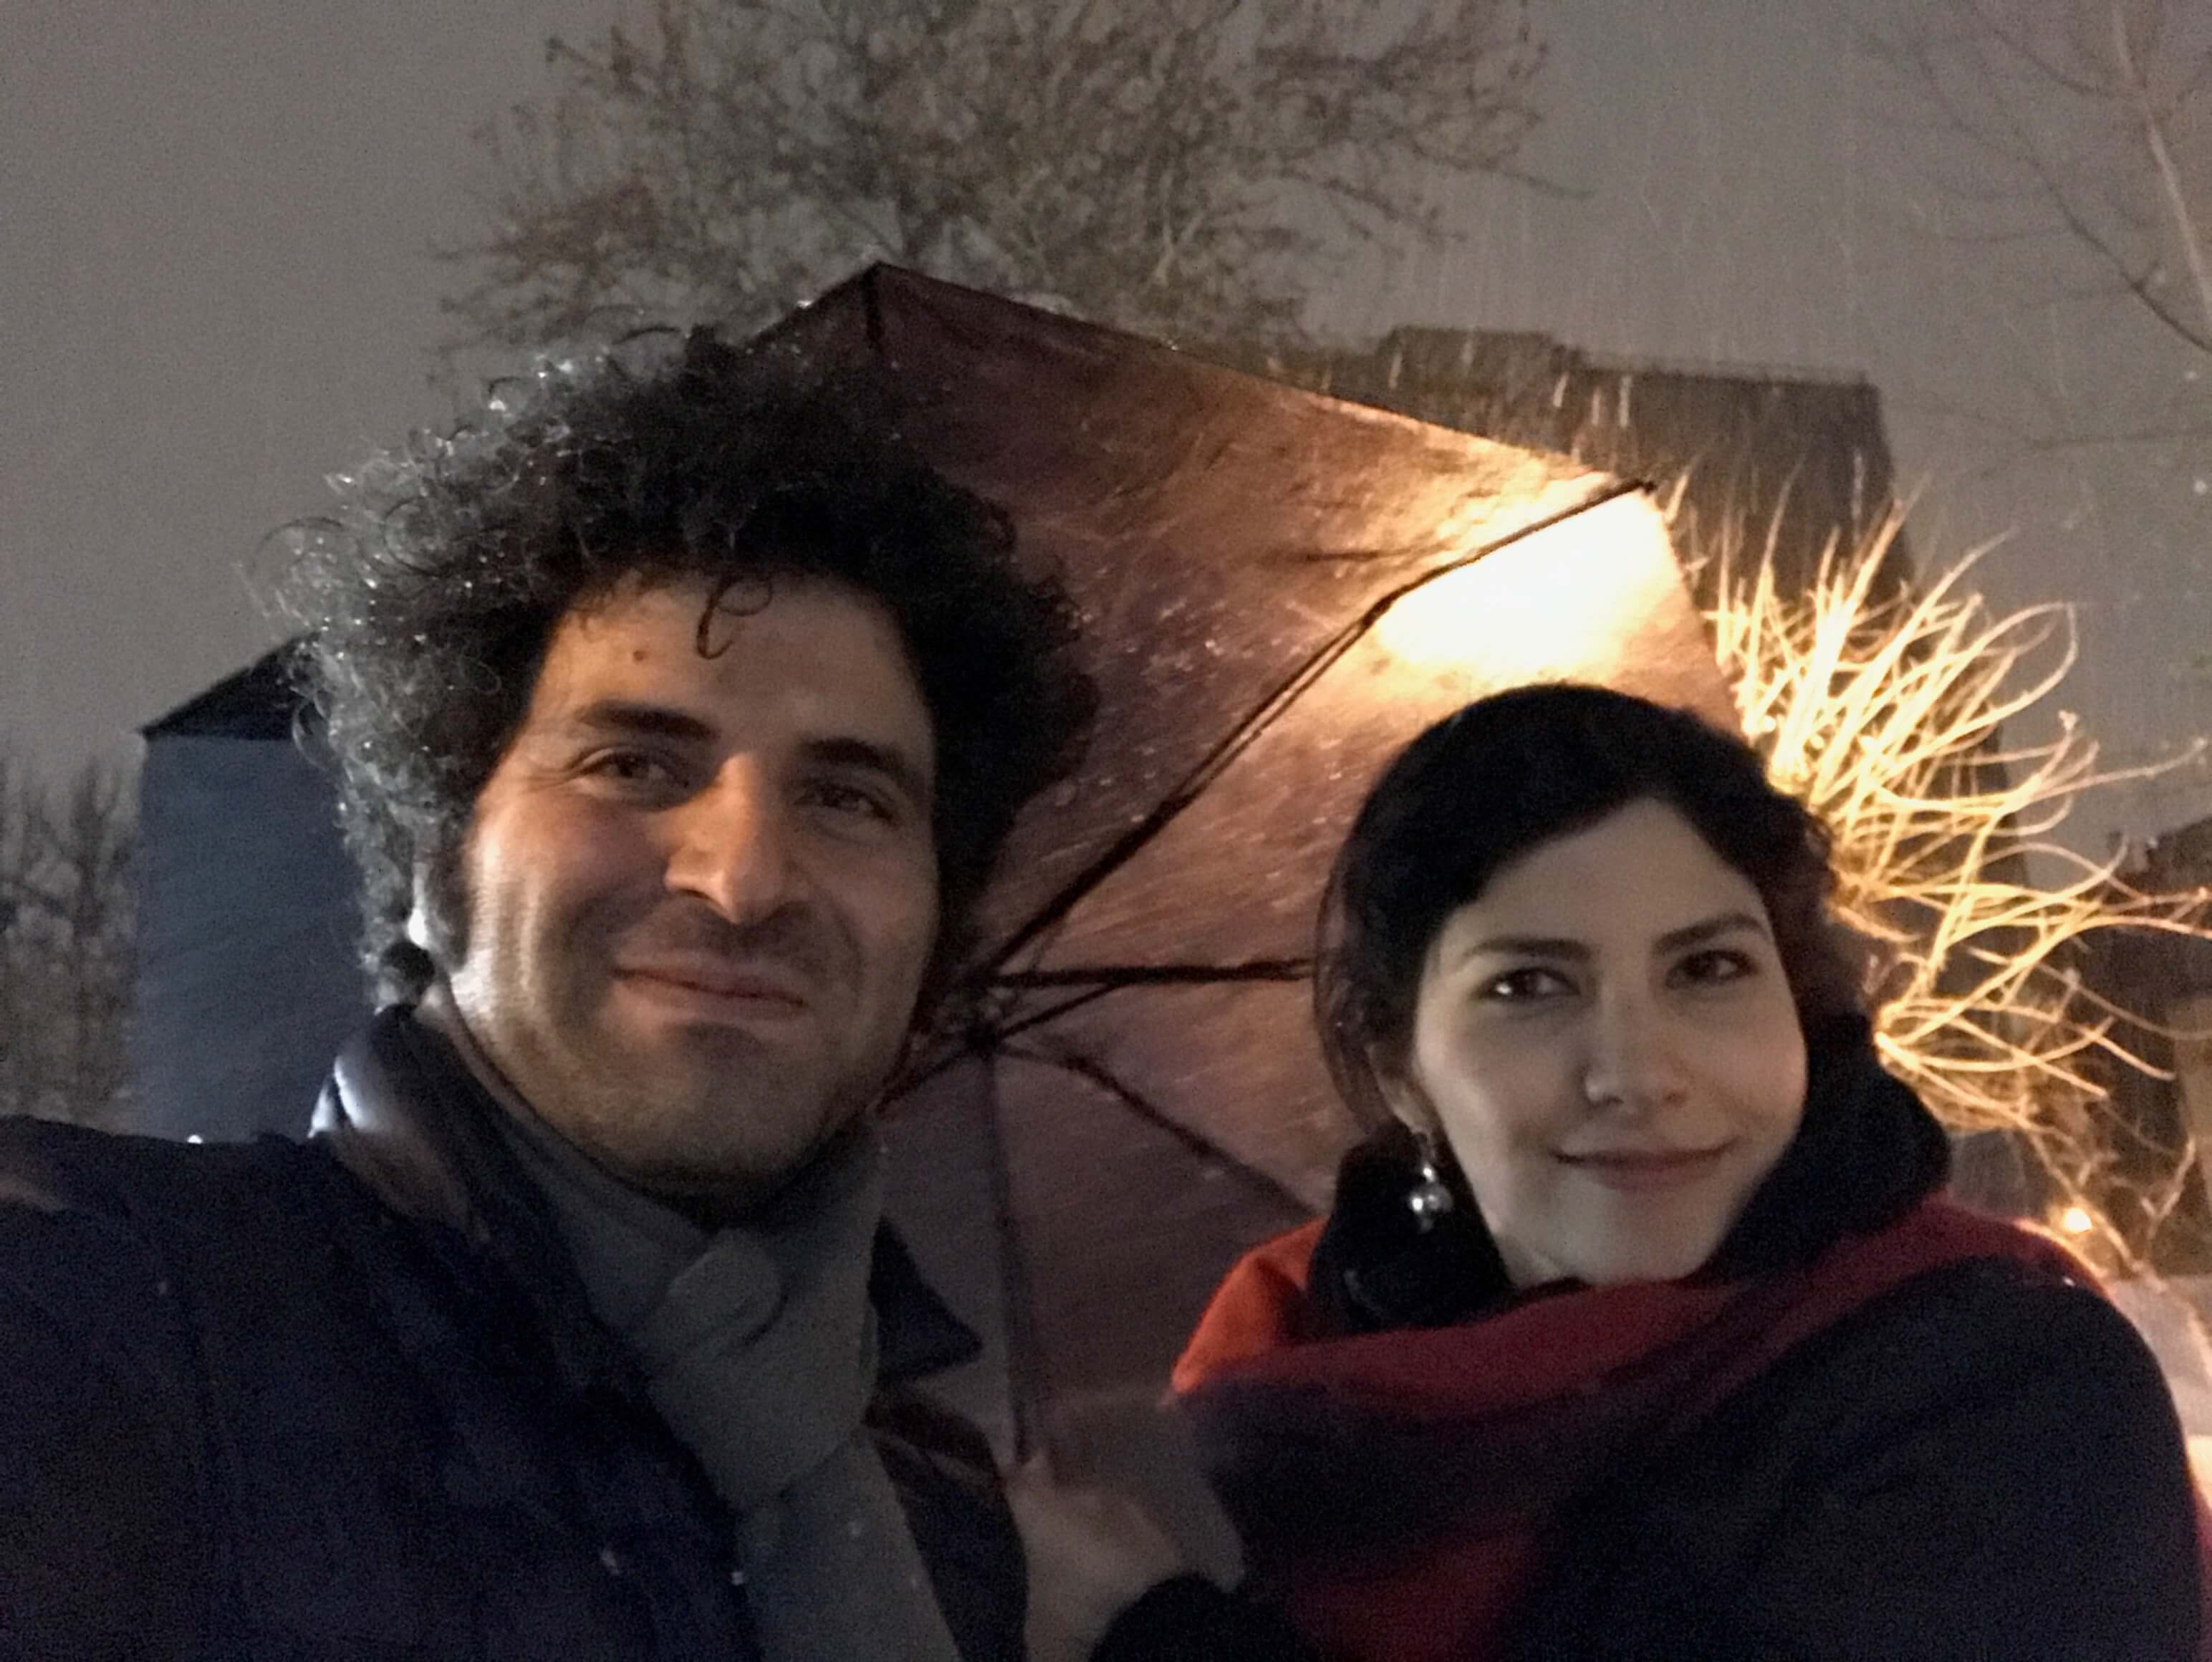 Sara Khaki and Mohammad Reza Eyni look directly at the camera and smile. It's nighttime and they wear winter clothes.